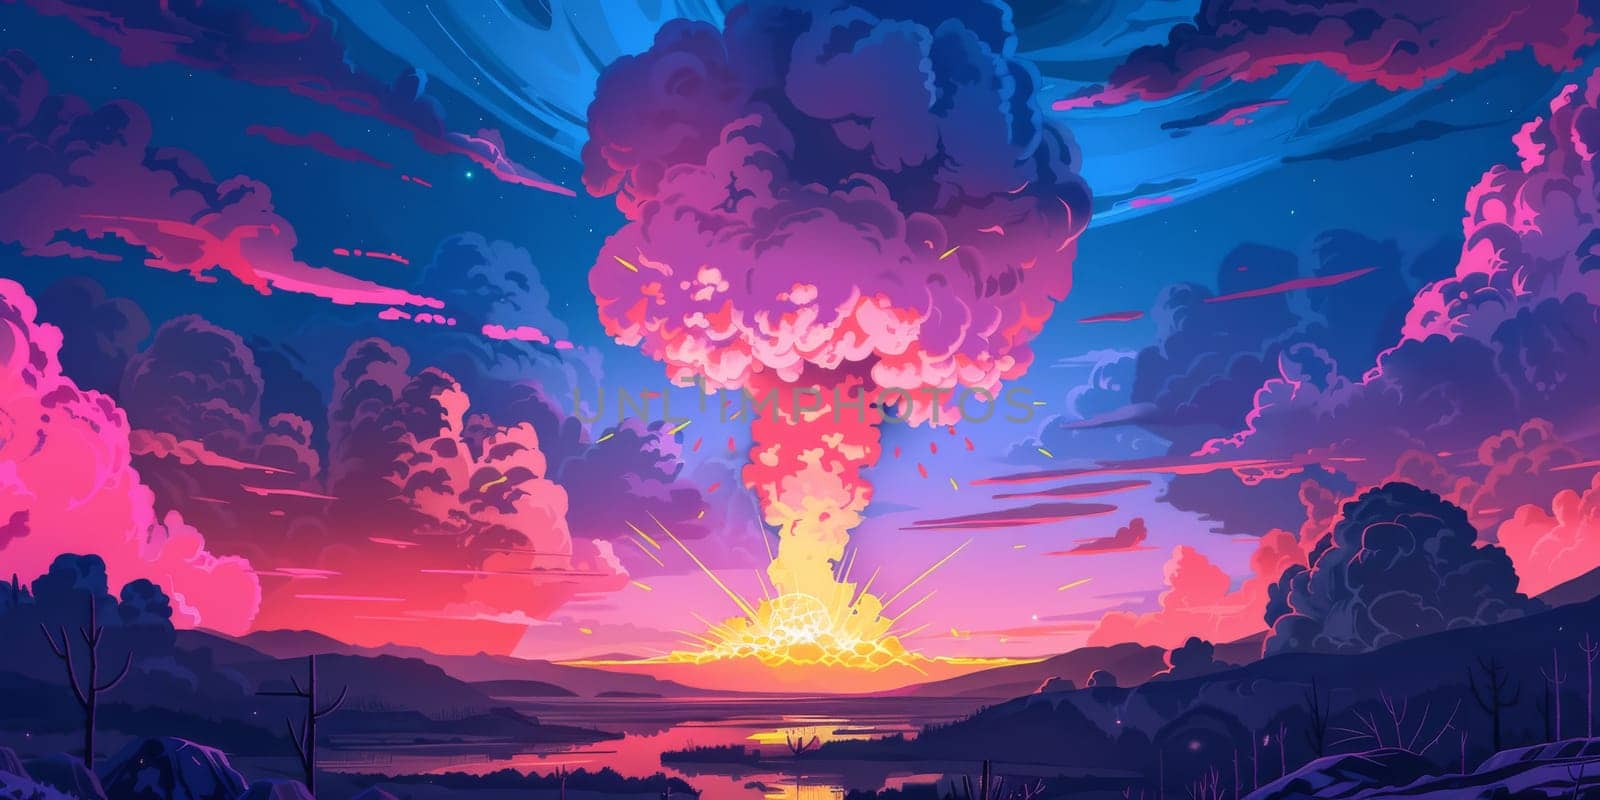 Atomic explosion with radioactive cloud, nuclear danger by Kadula